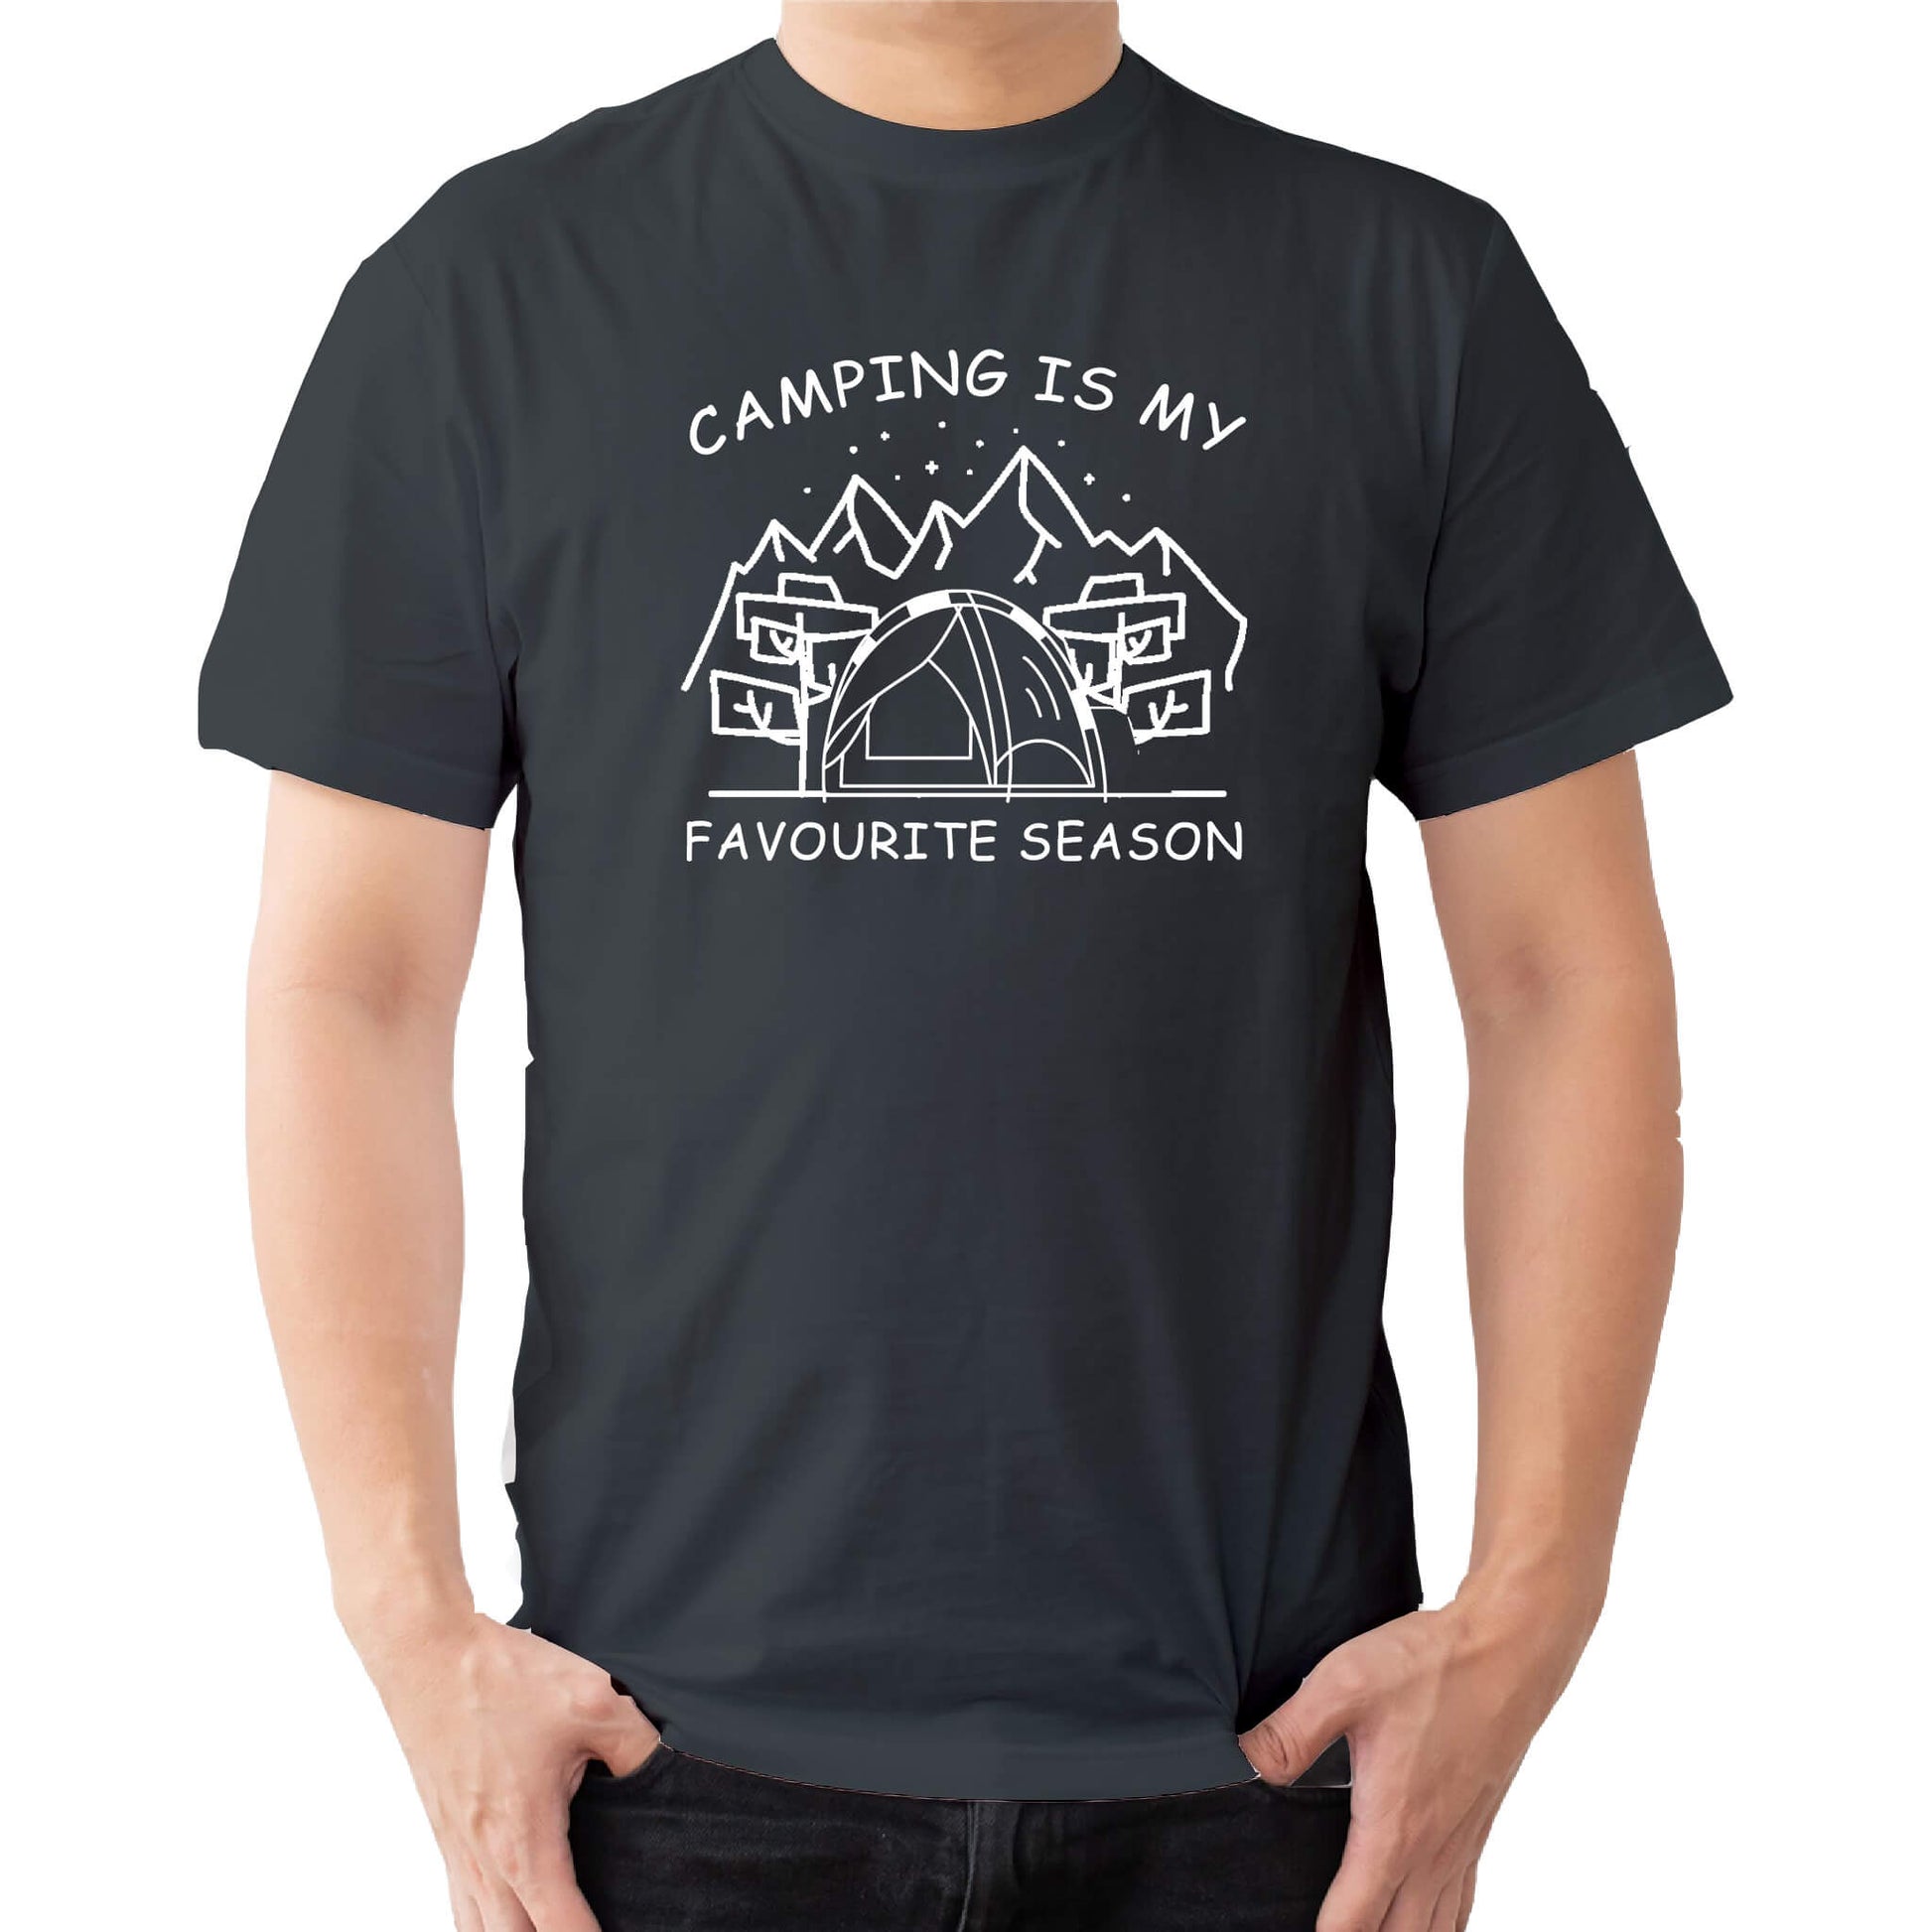  "Grey Graphic tee with an illustration of a tent, surrounded by nature. Text reads: 'Camping is my favorite season.' Celebrate the great outdoors!"